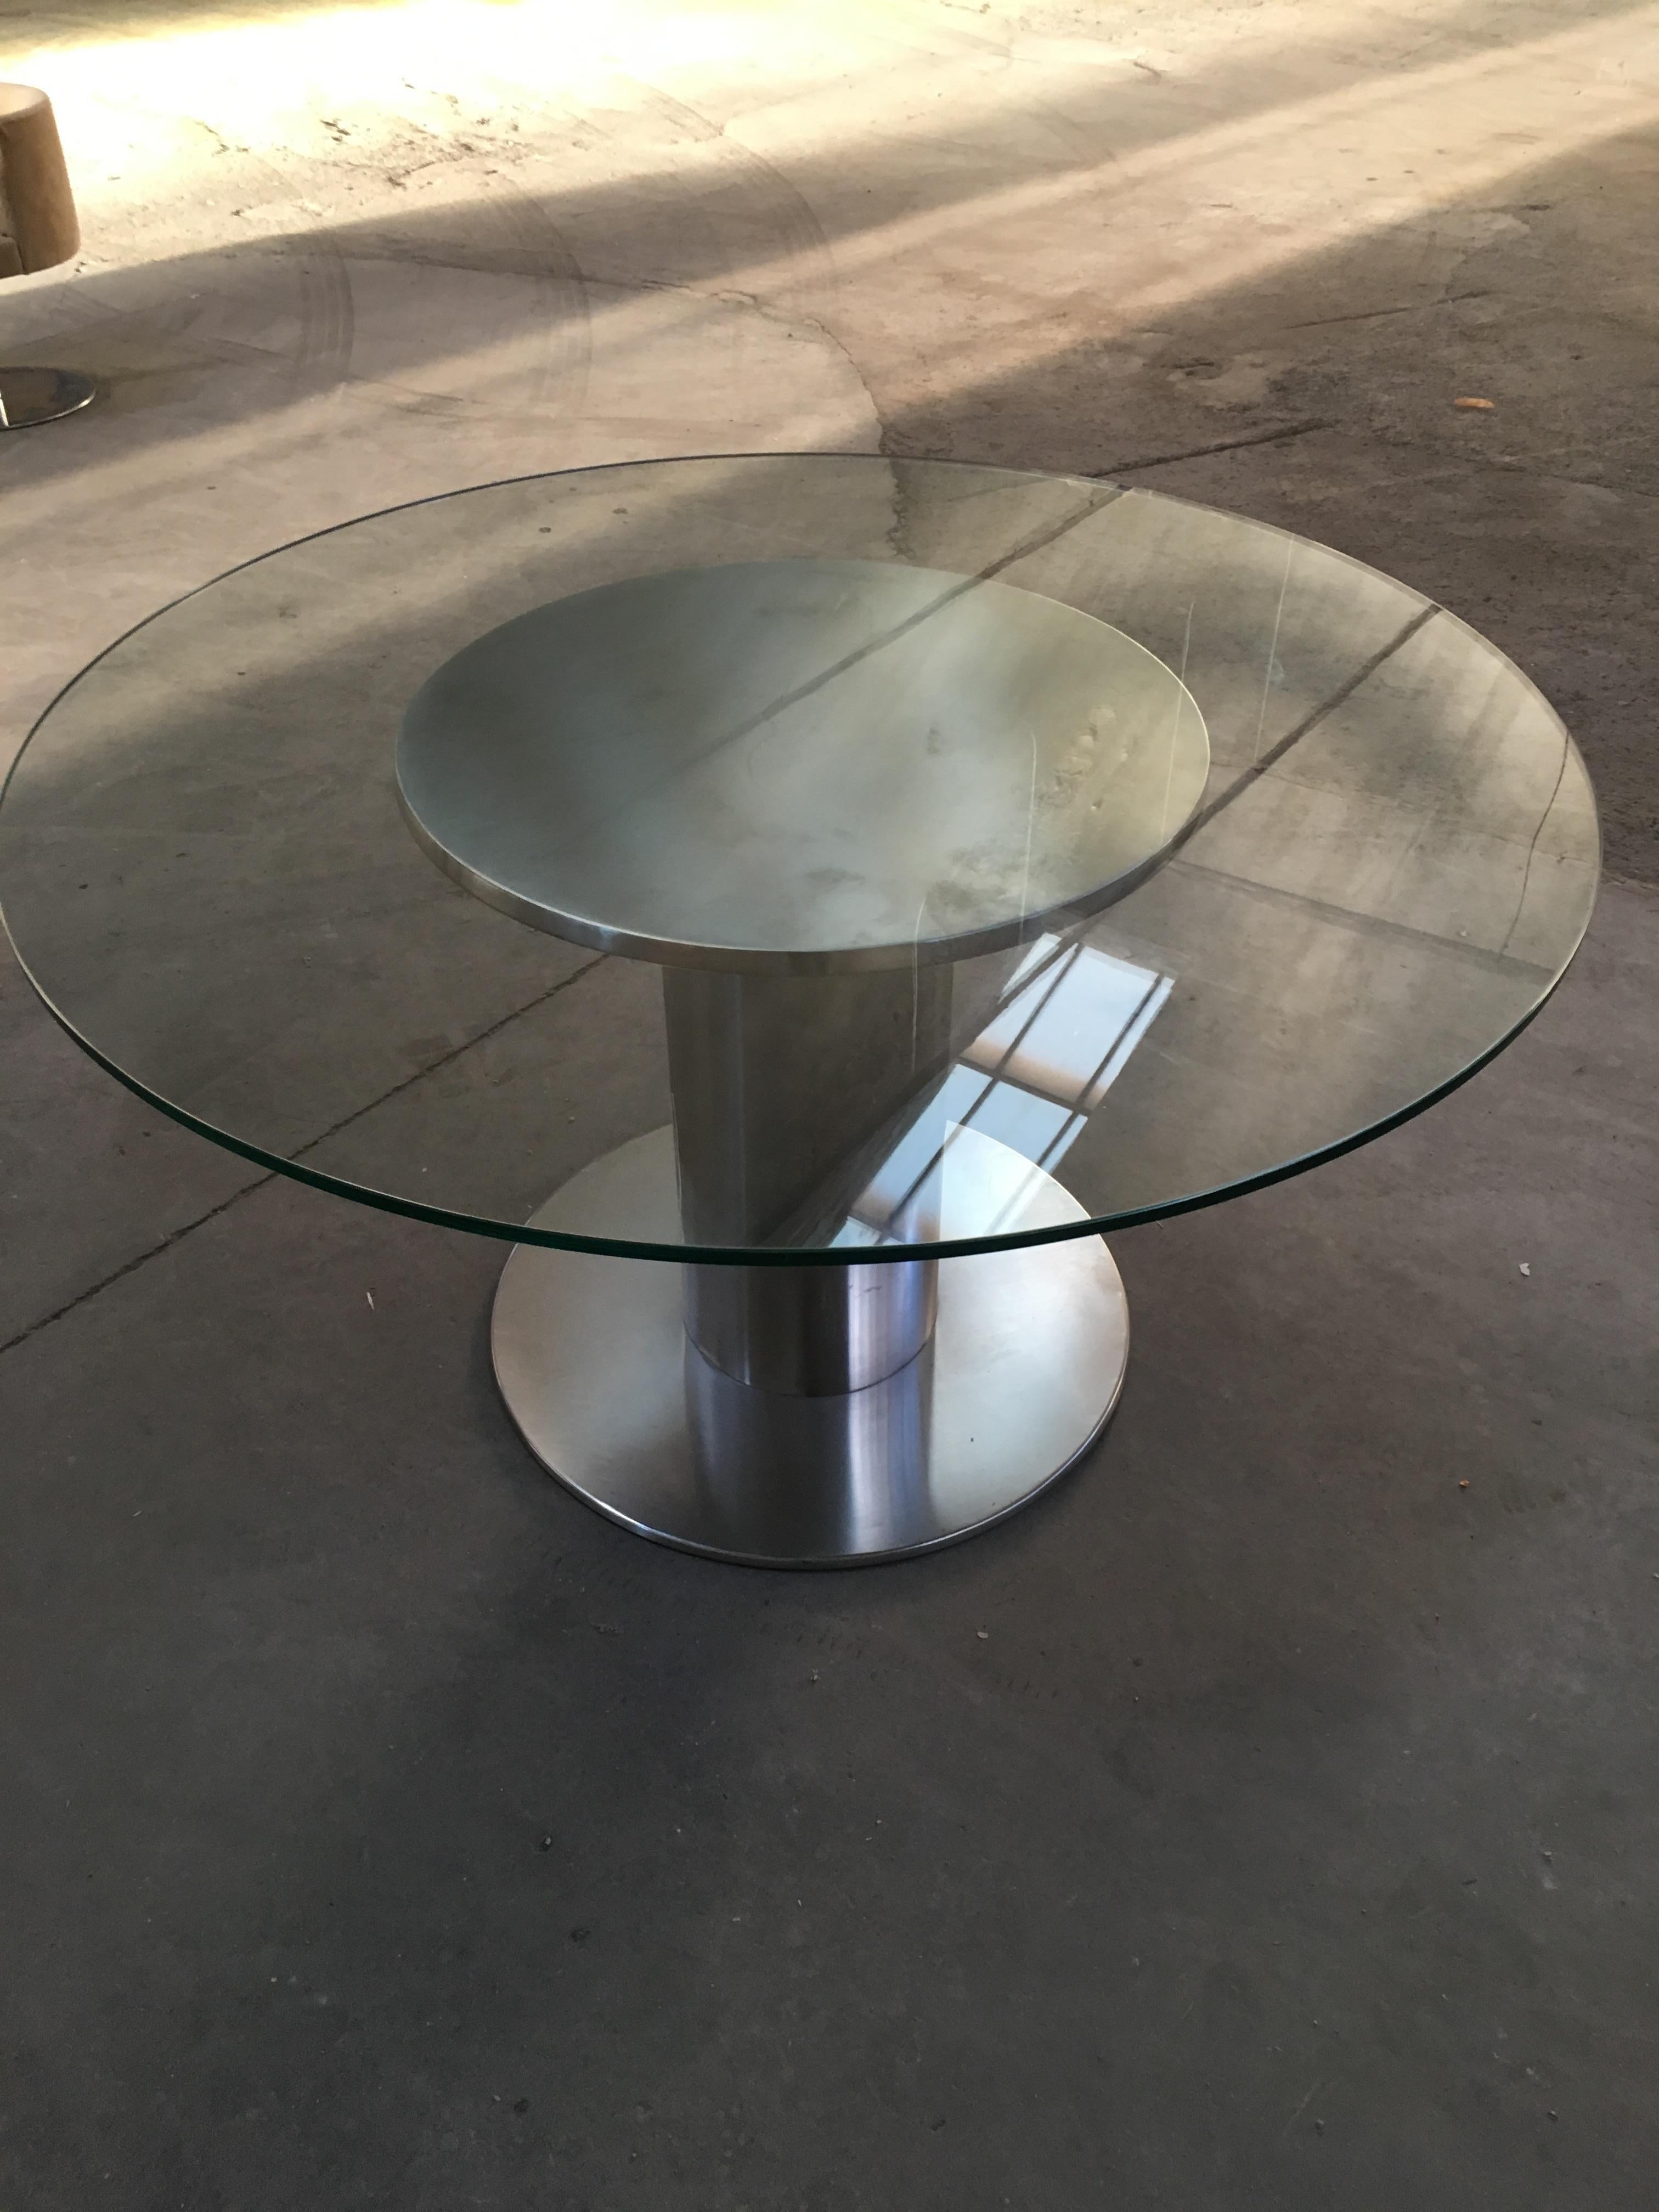 Late 20th Century Mid-Century Modern Italian Chrome Table with Round Glass Top from 1970s For Sale